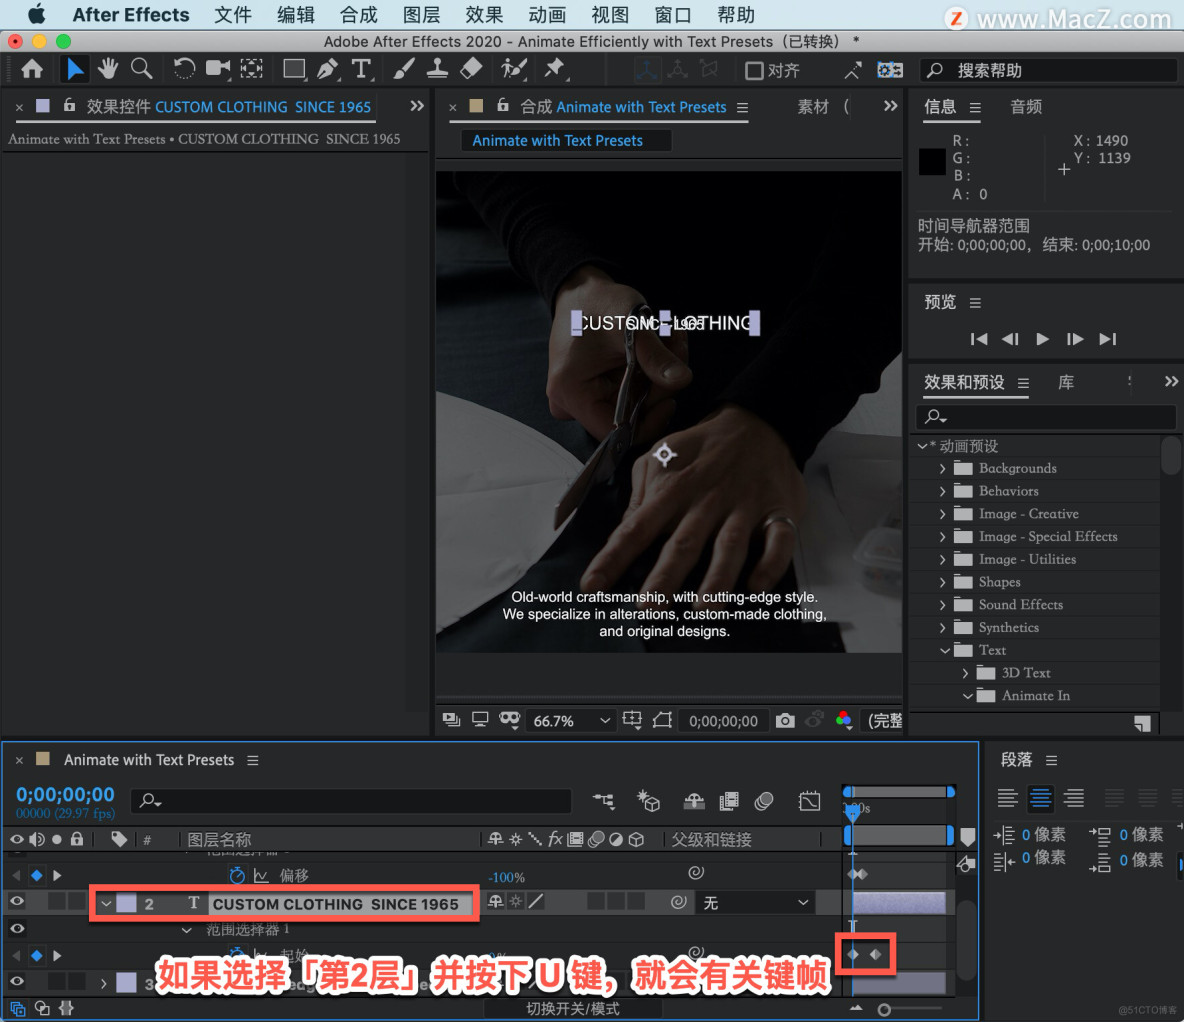 After Effects 教程，如何在 After Effects 中更改动画计时？_AE_09